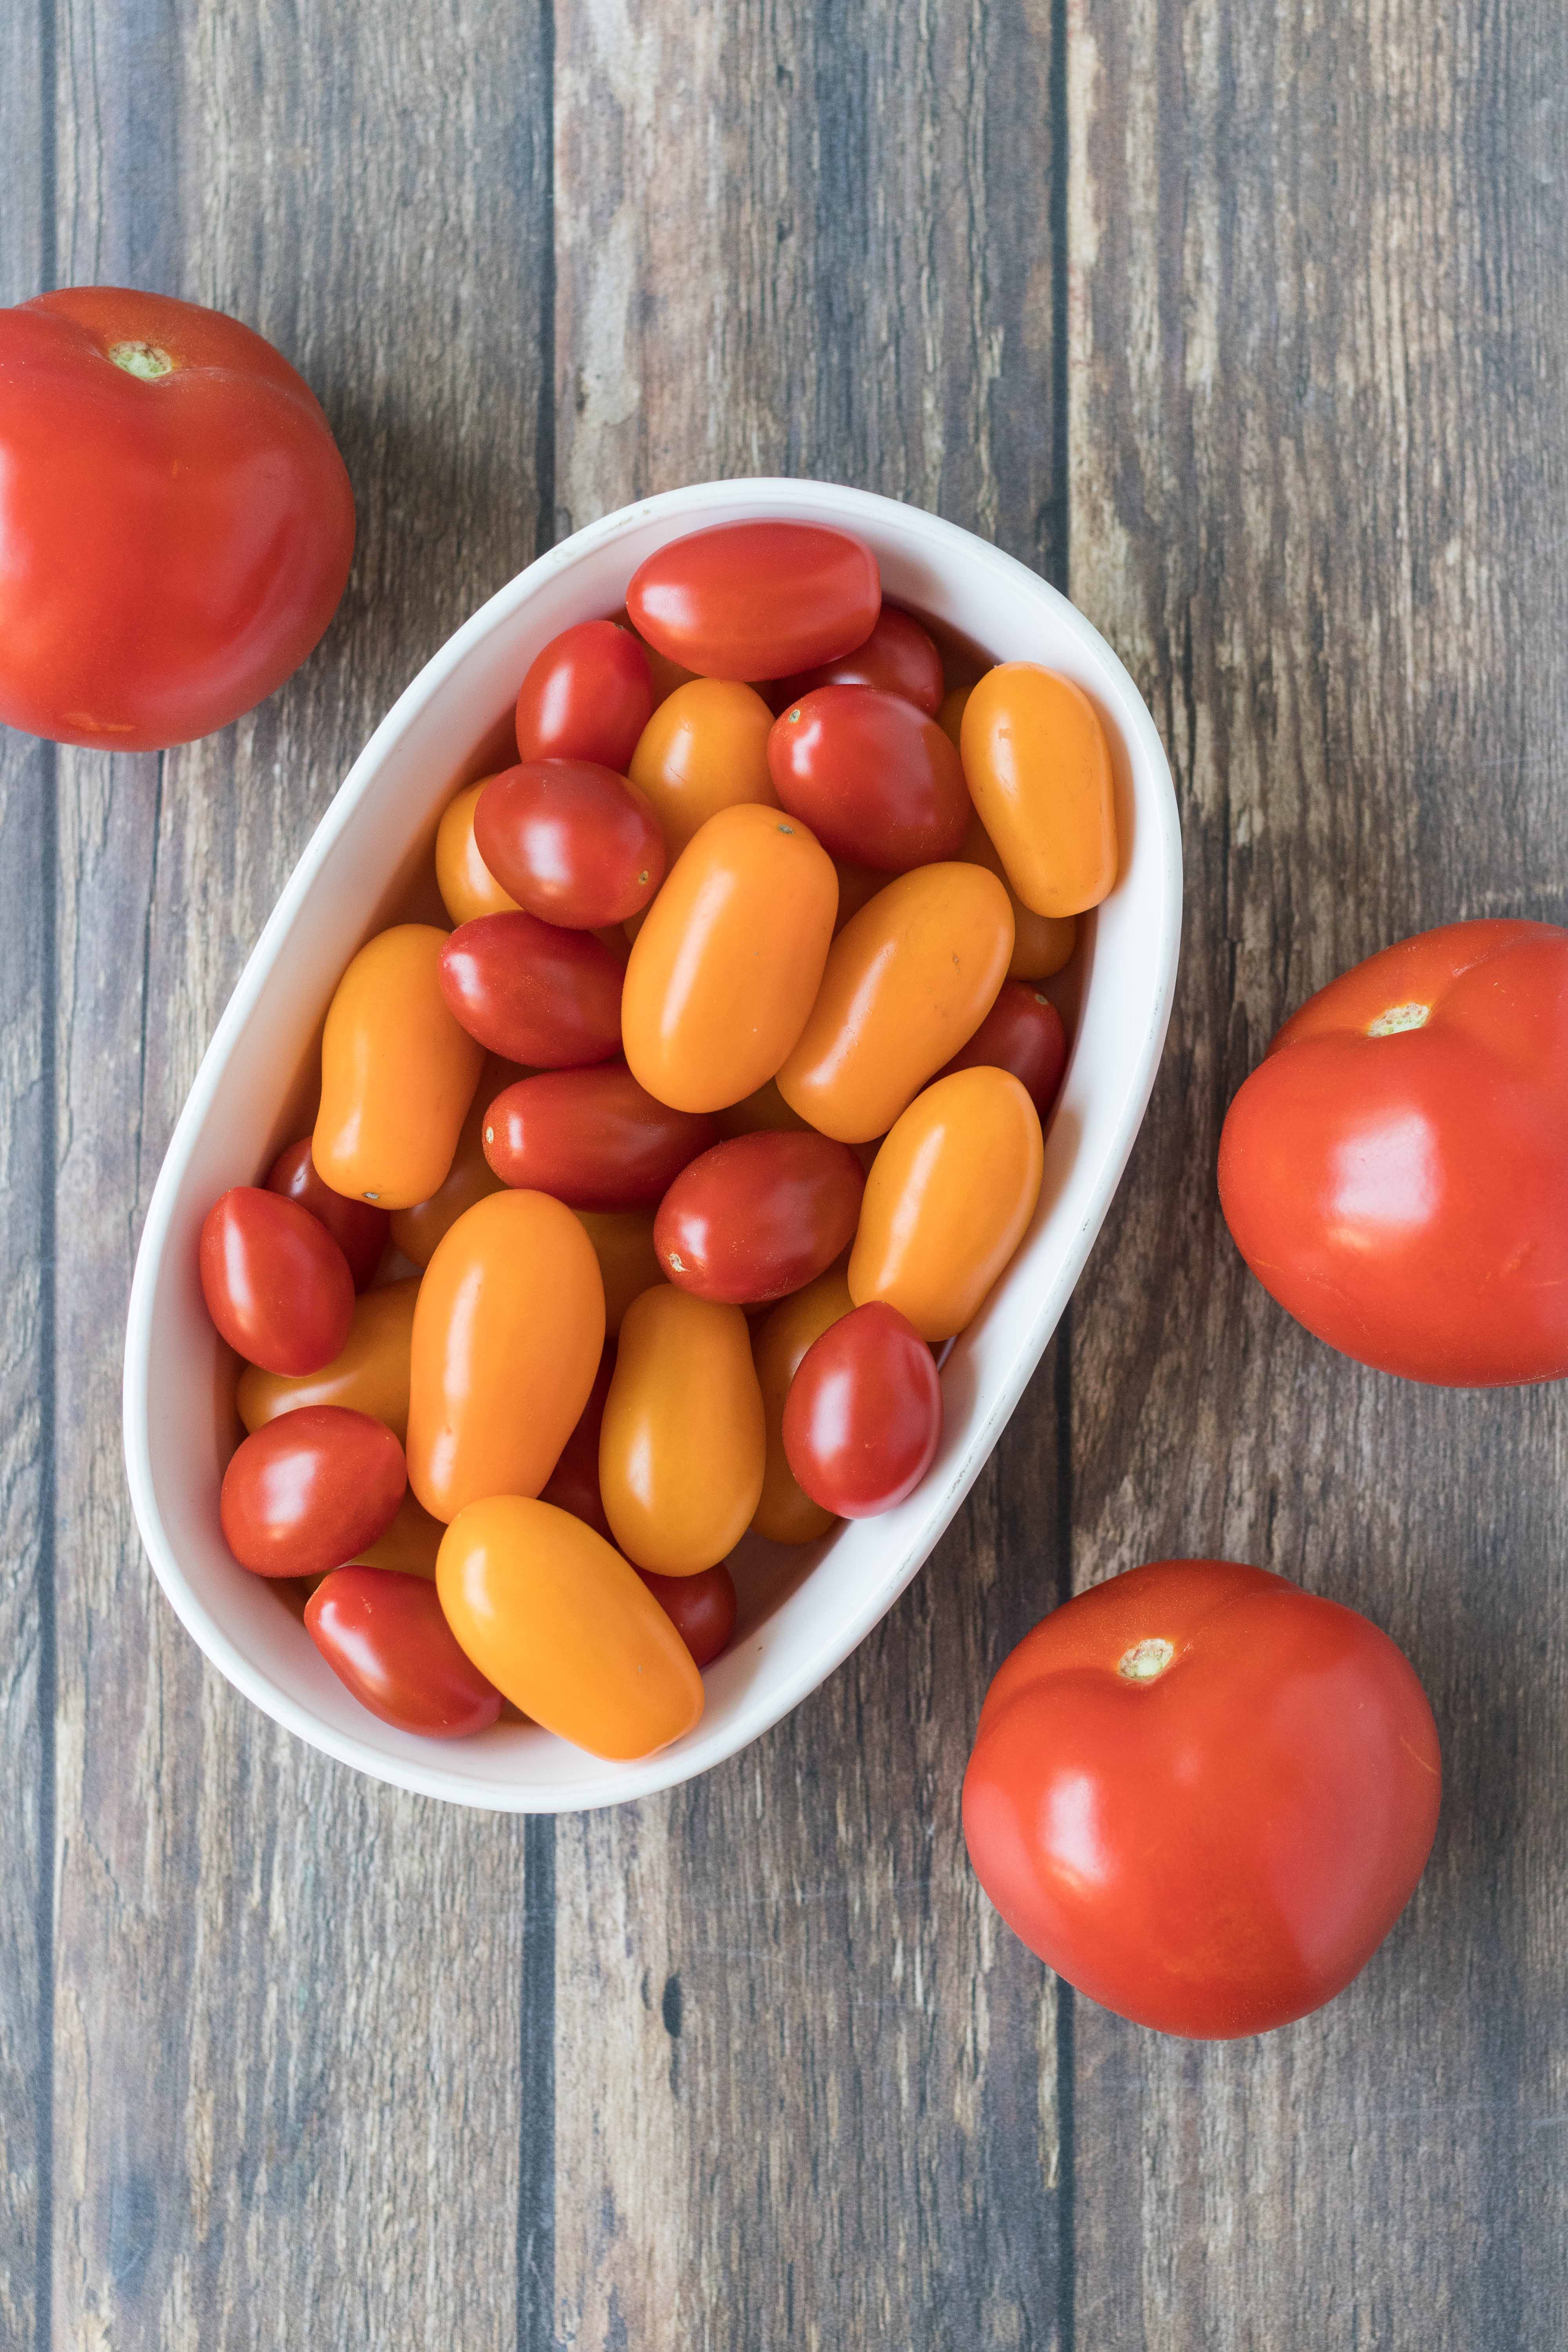 Full-size tomatoes and both red and yellow cherry tomatoes are great options are caprese salad and other caprese recipes. #capreserecipes #capresesalad #tomatoes | https://www.roseclearfield.com